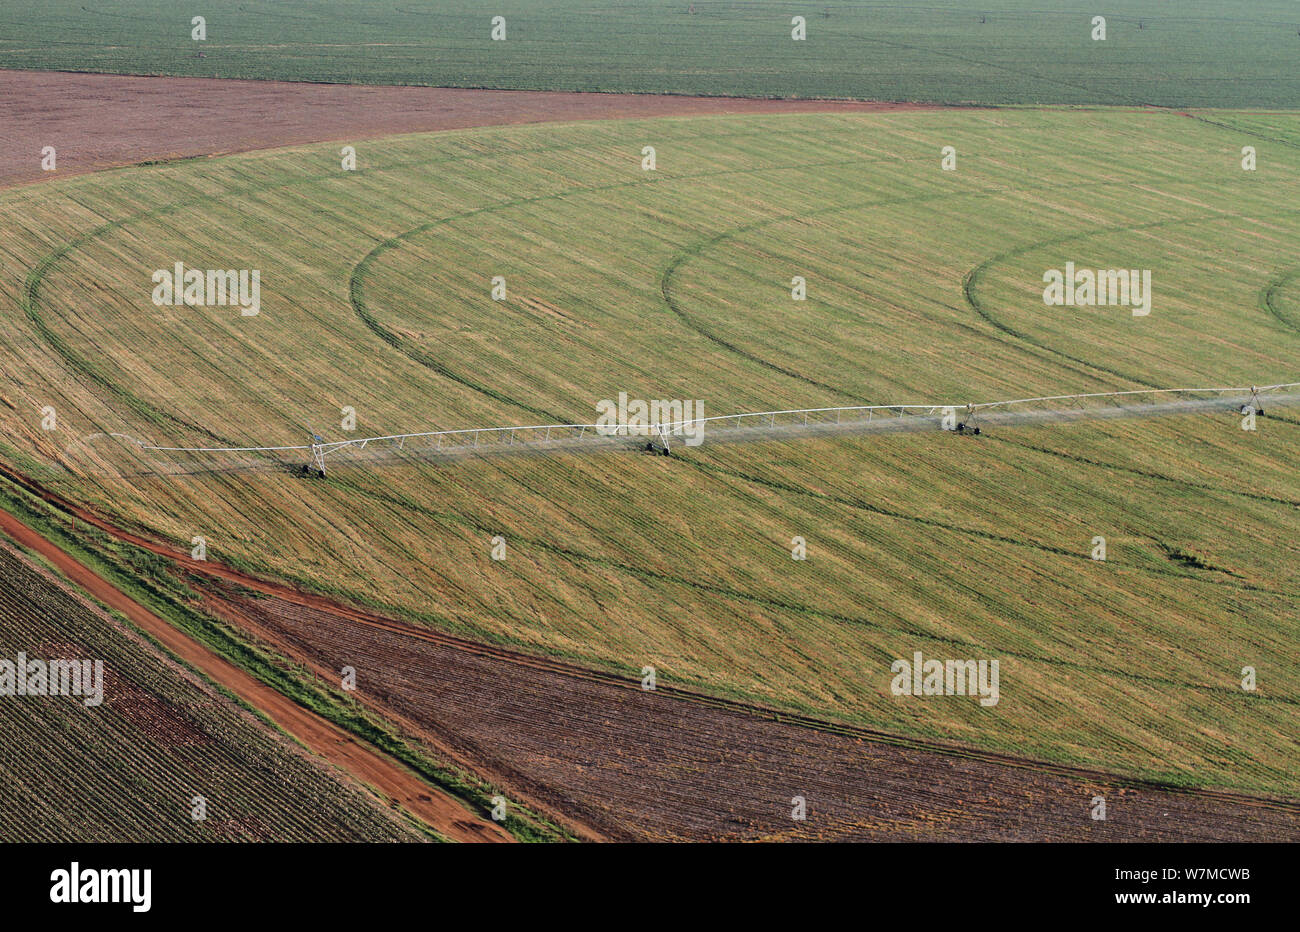 Aerial view of farms, Drakensberg, South Africa Stock Photo